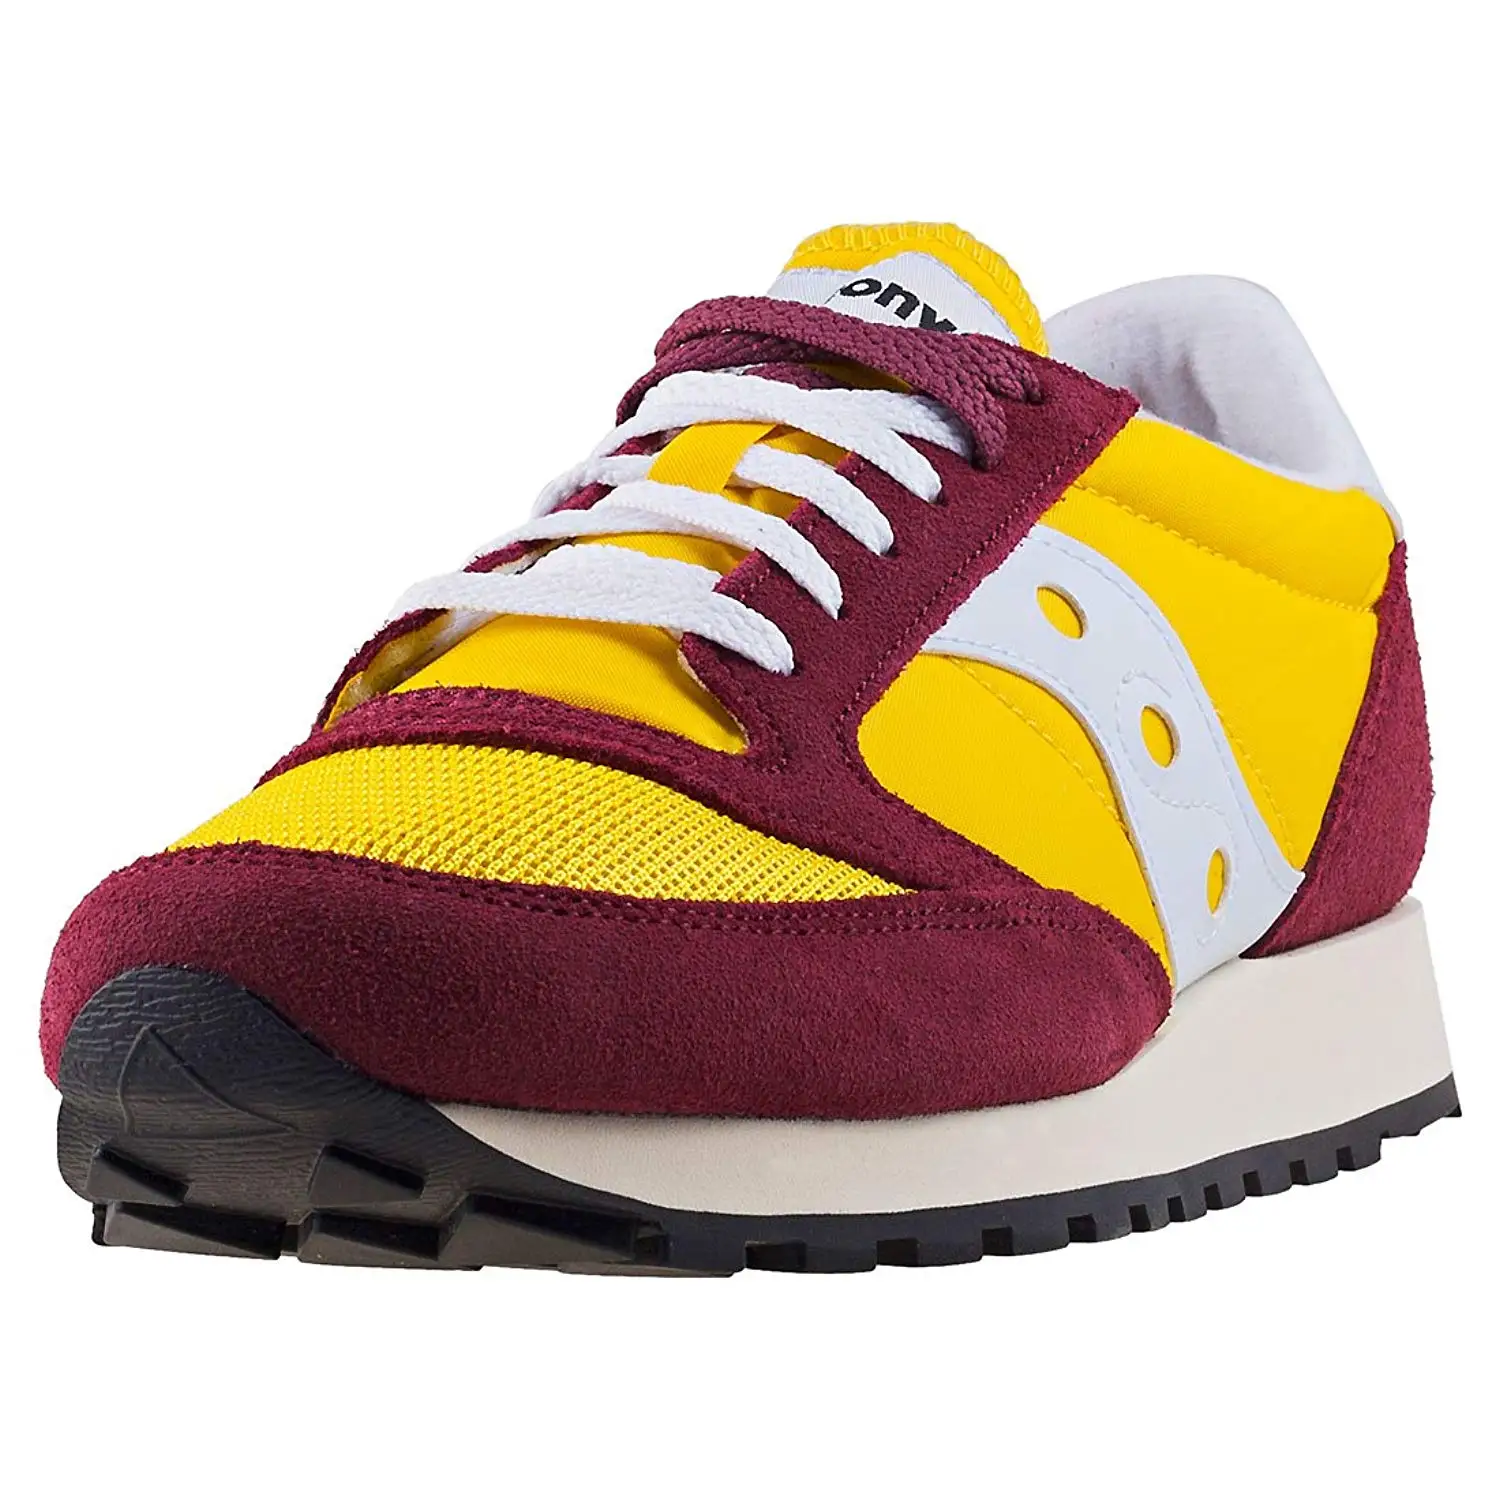 Cheap Saucony Trainers Uk, find Saucony 